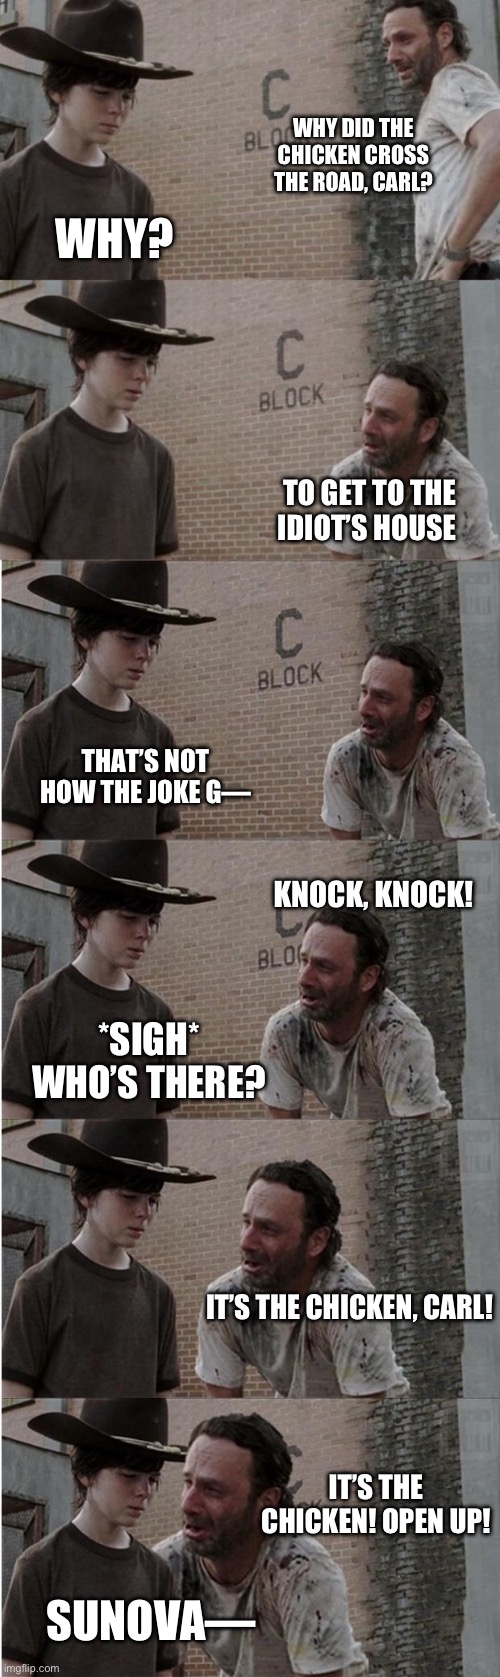 Rick and Carl Longer | WHY DID THE CHICKEN CROSS THE ROAD, CARL? WHY? TO GET TO THE IDIOT’S HOUSE; THAT’S NOT HOW THE JOKE G—; KNOCK, KNOCK! *SIGH* WHO’S THERE? IT’S THE CHICKEN, CARL! IT’S THE CHICKEN! OPEN UP! SUNOVA— | image tagged in memes,rick and carl longer | made w/ Imgflip meme maker